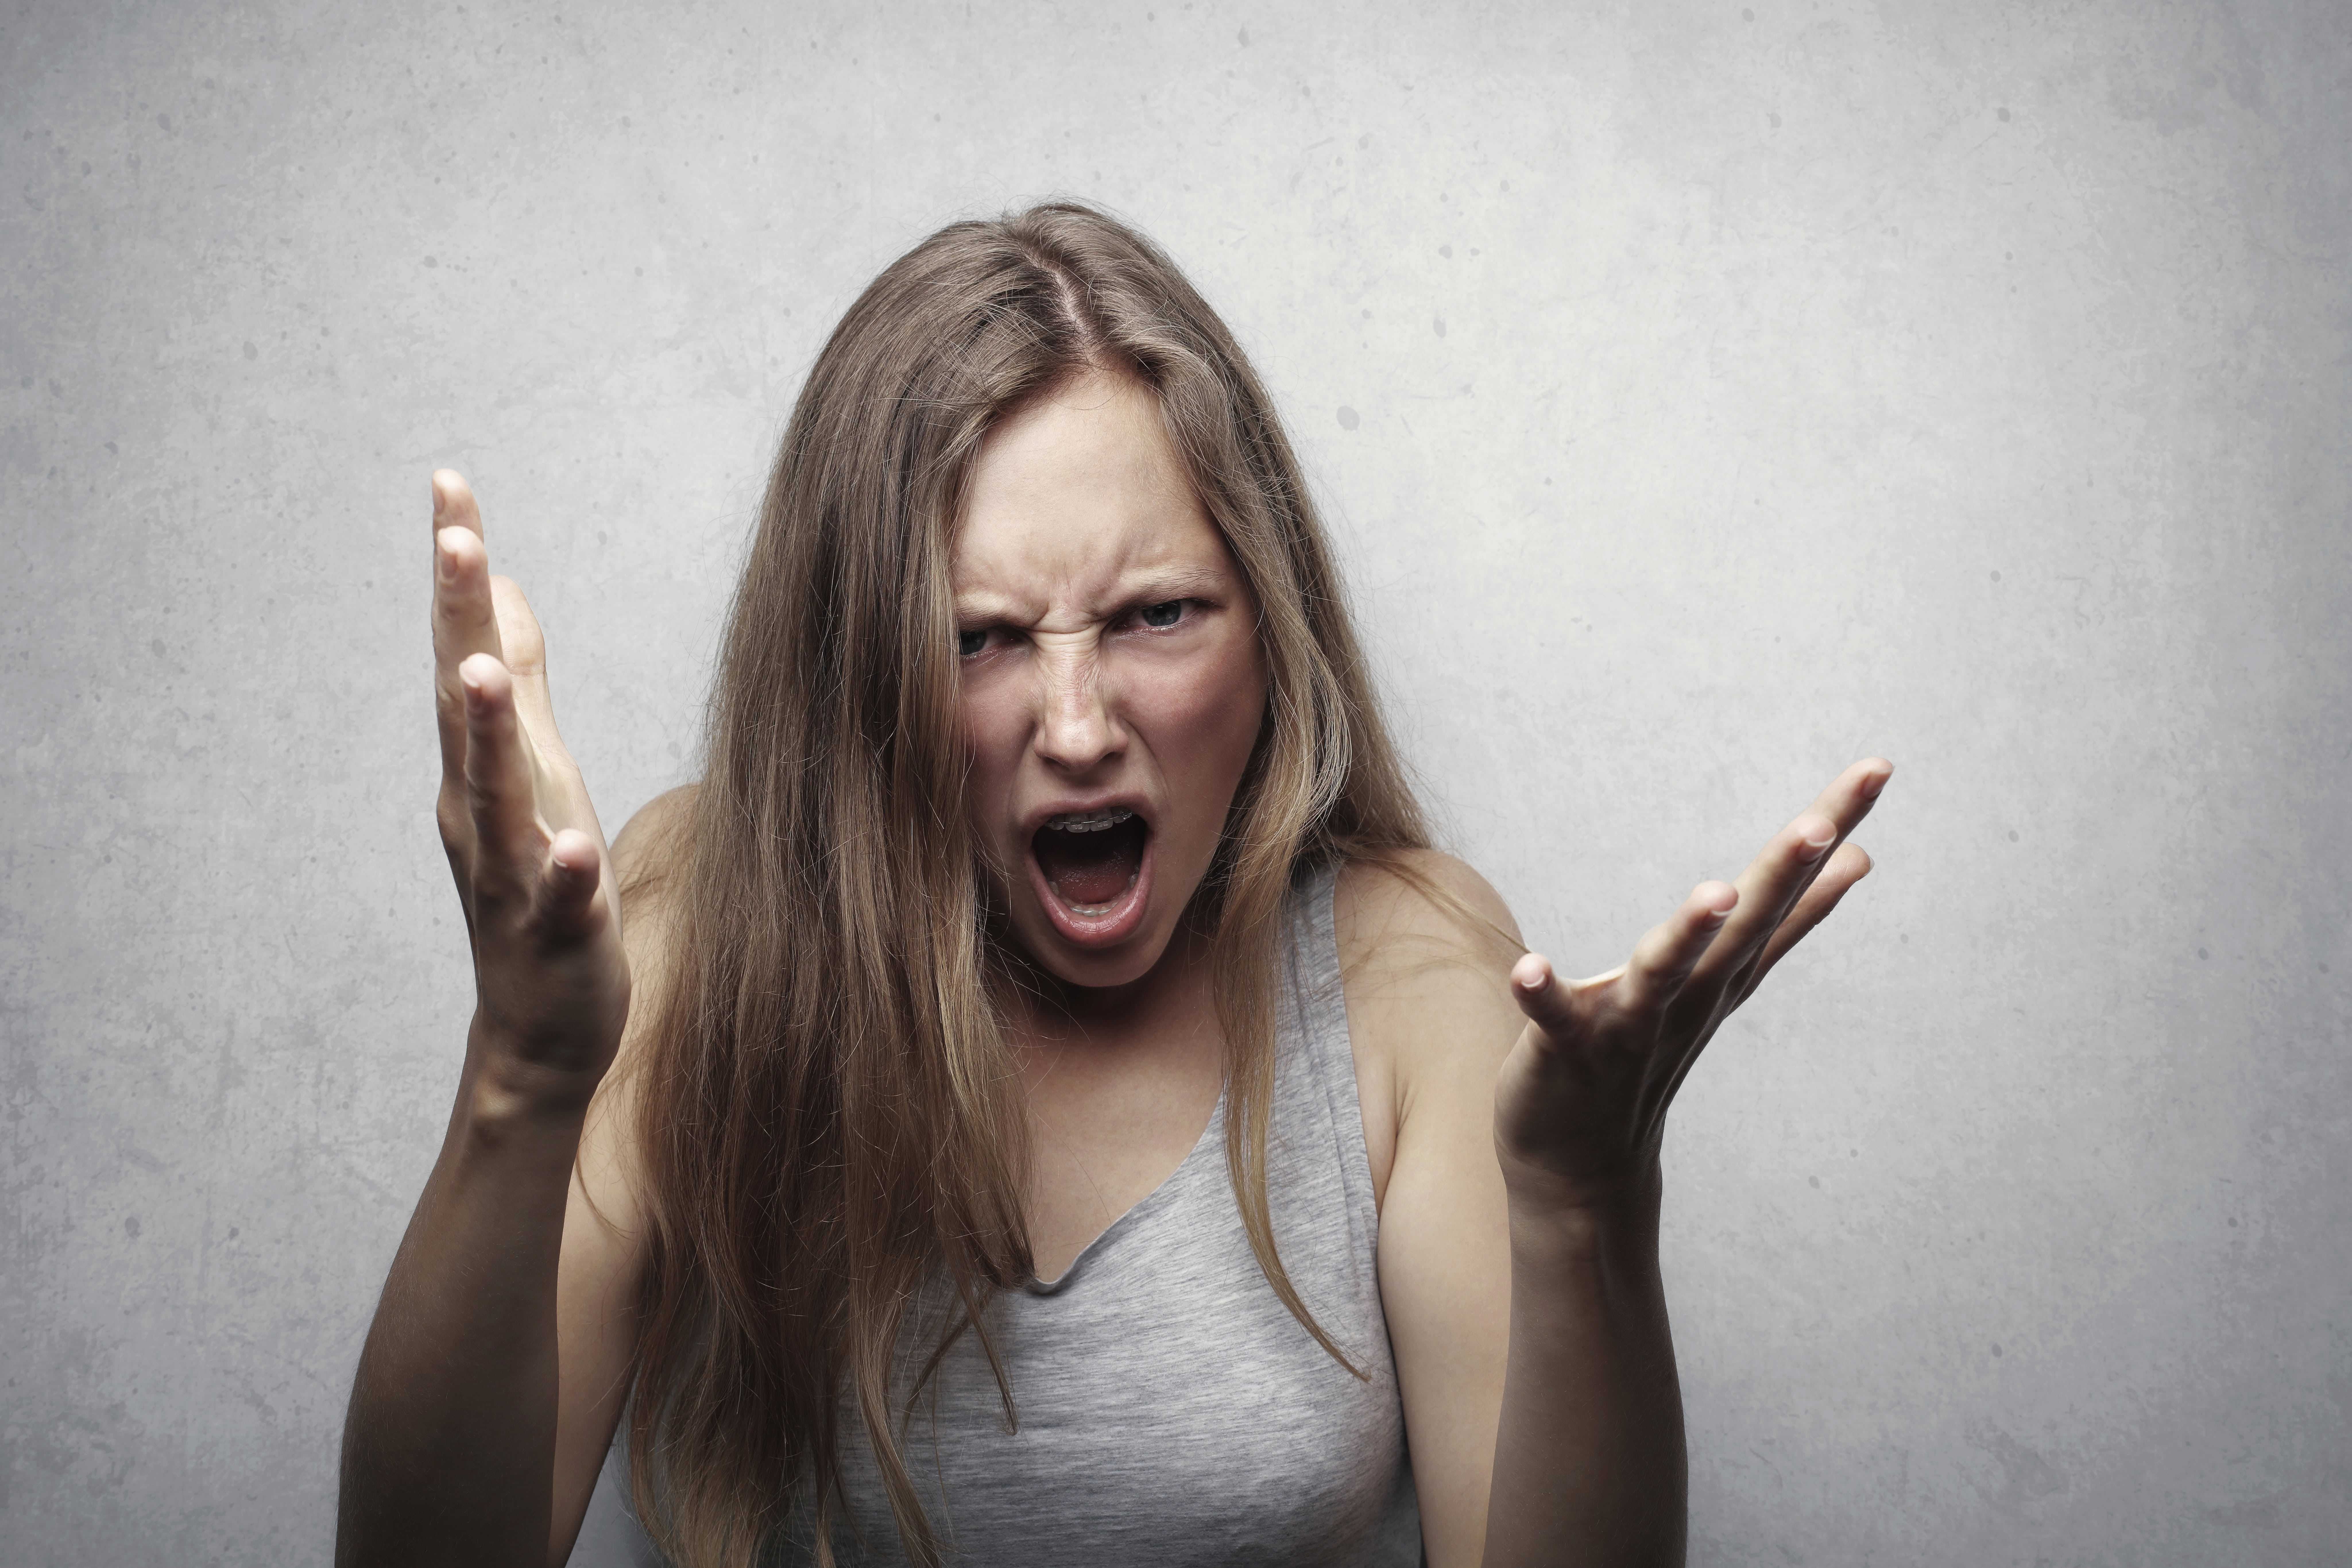 An angry woman shouting while gesturing with her hands | Source: Pexels